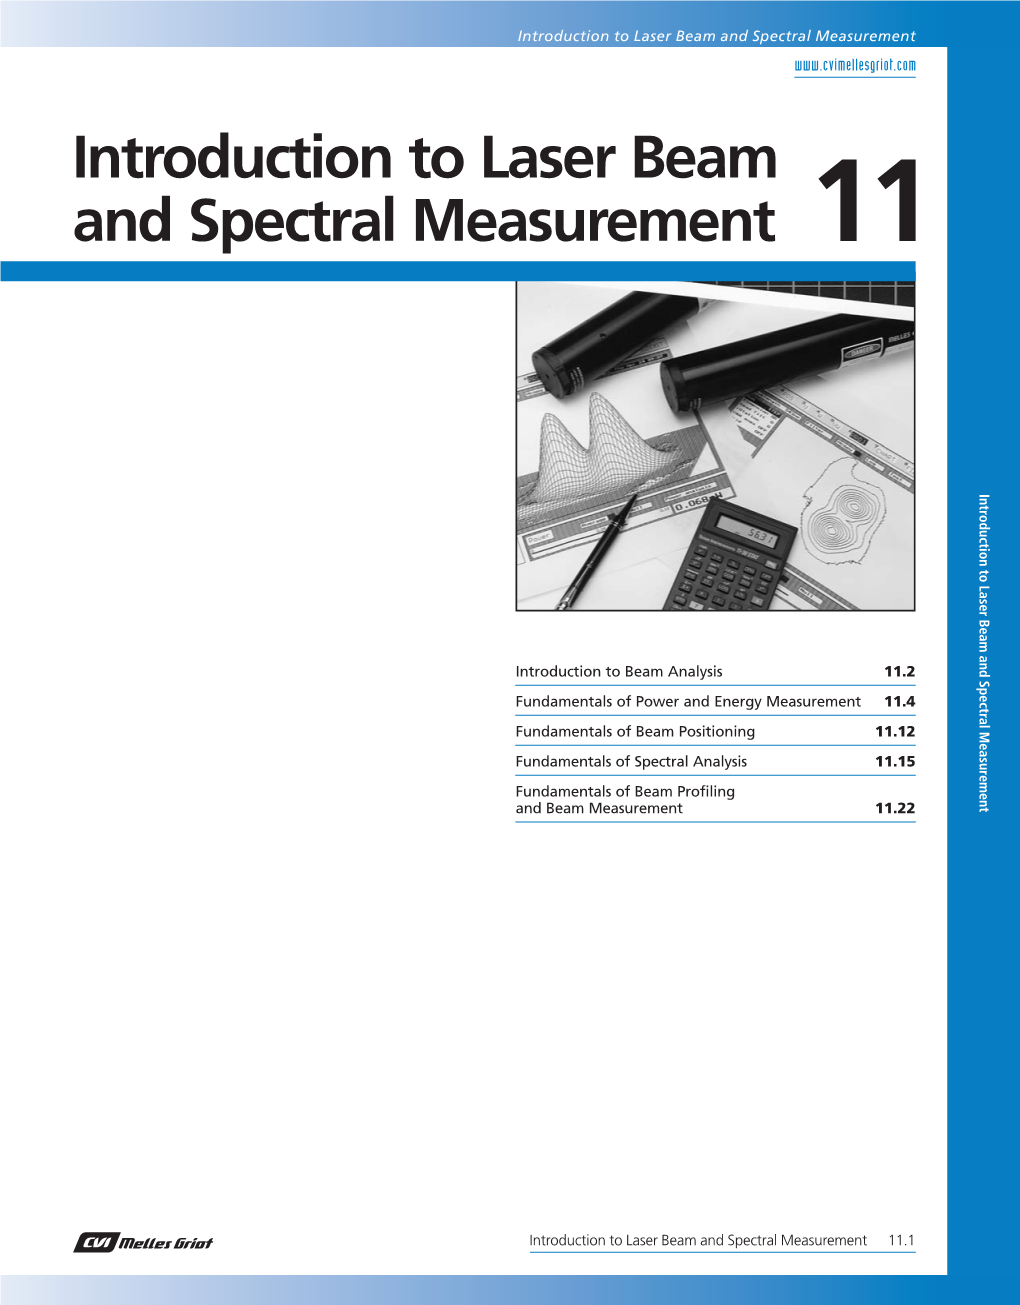 Introduction to Laser Beam & Spectral Measurement